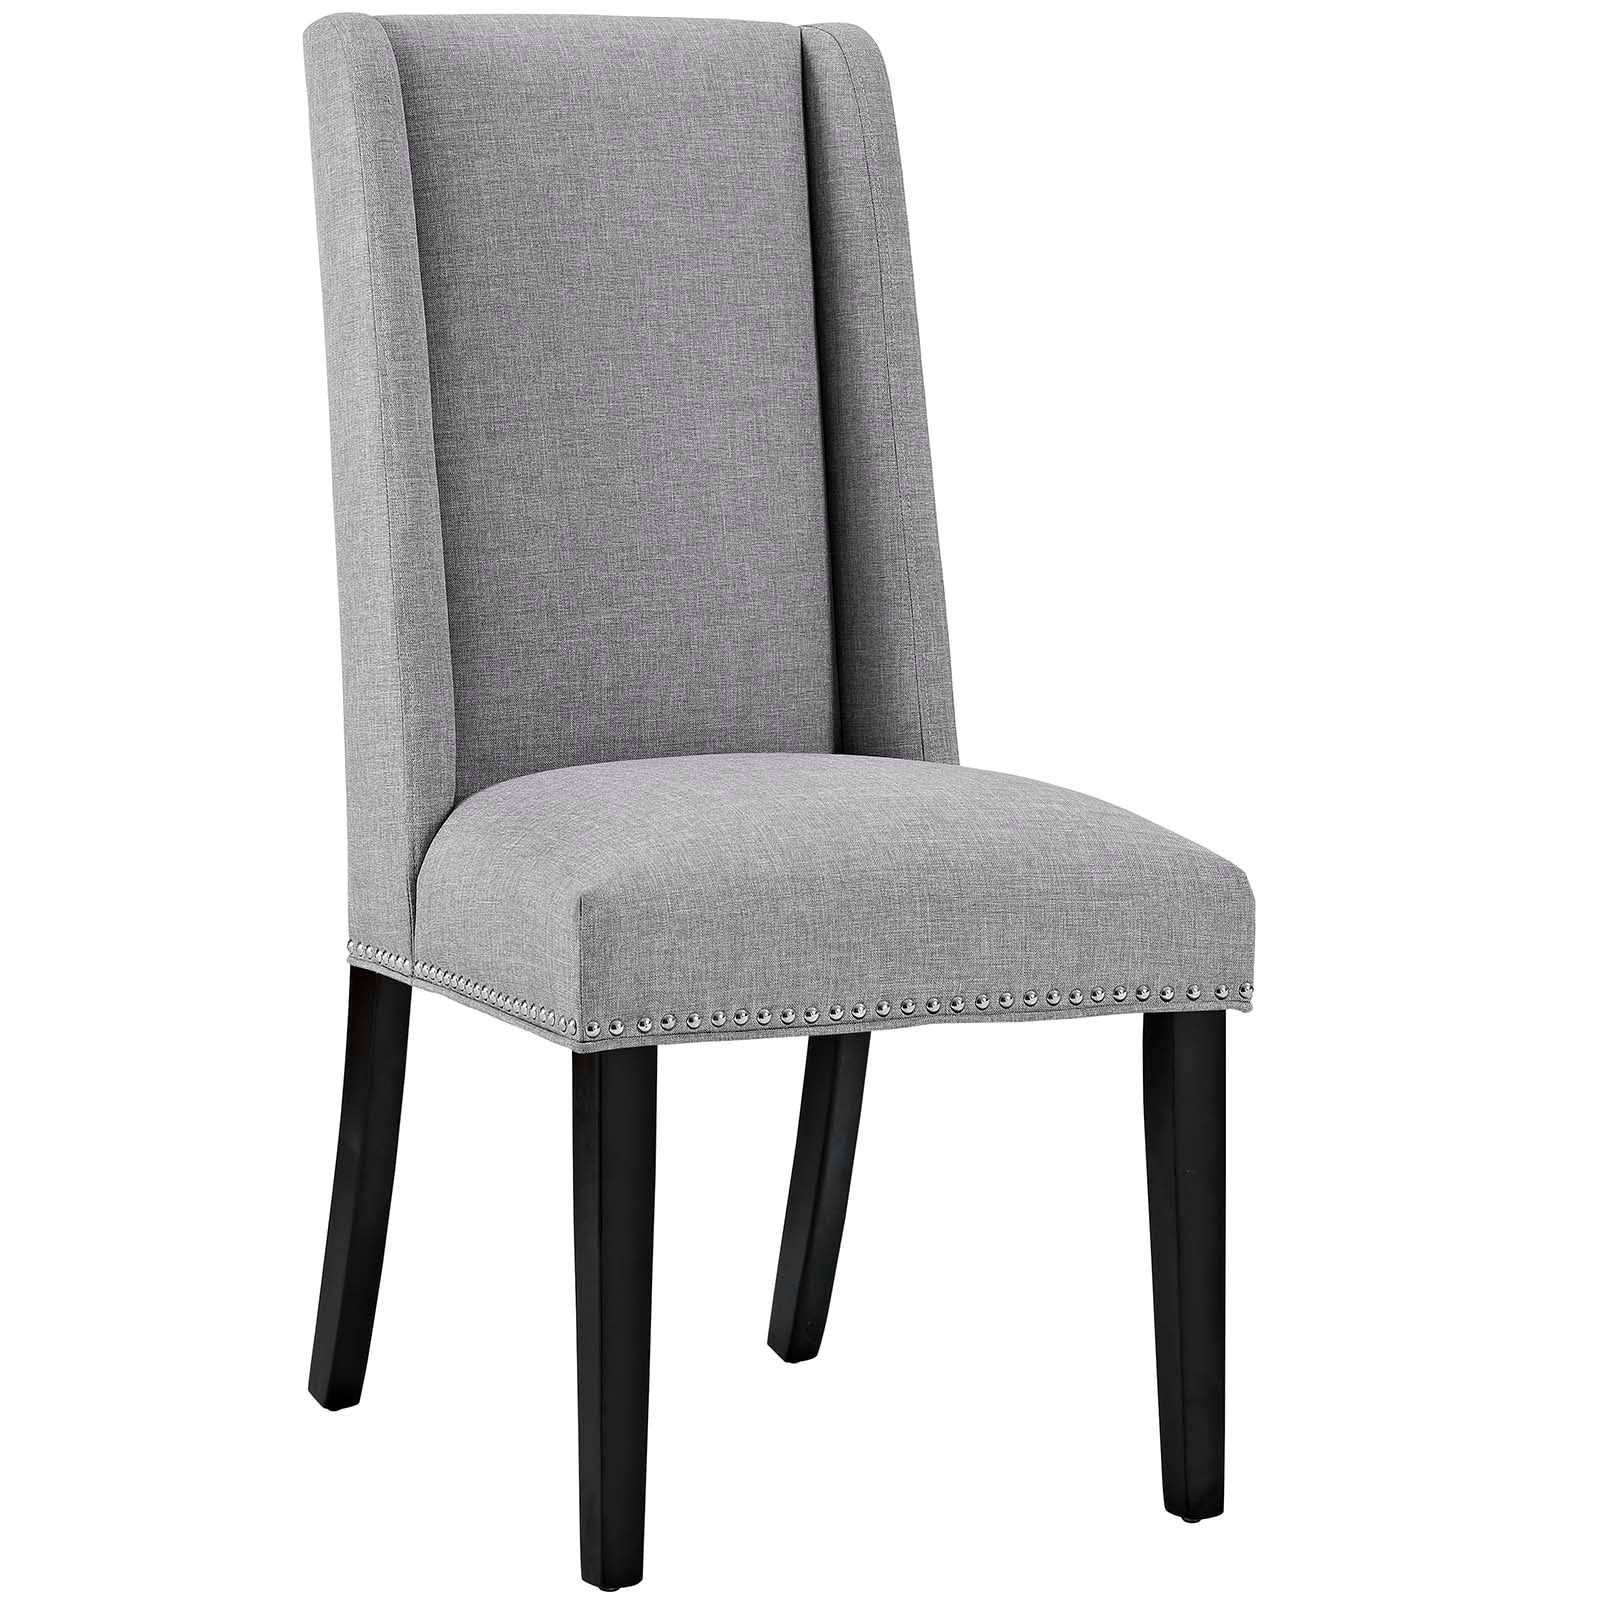 Modway Dining Chairs - Baron Dining Chair Fabric Set of 4 Light Gray